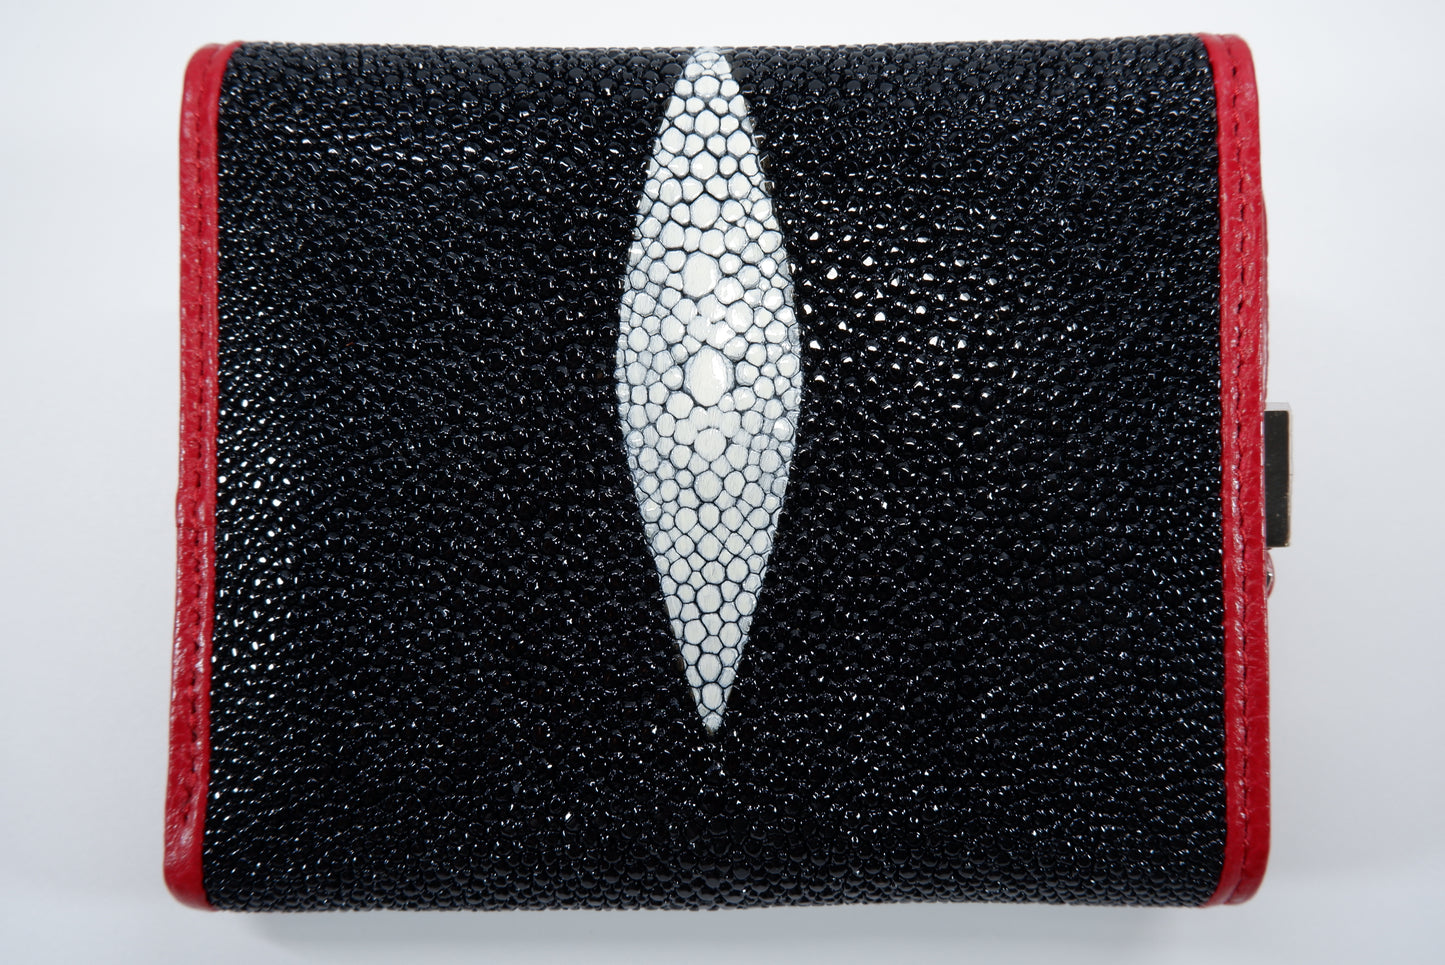 Genuine Stingray Skin Leather Medium Clutch Wallet Zip Coins Purse with Silver Buckle